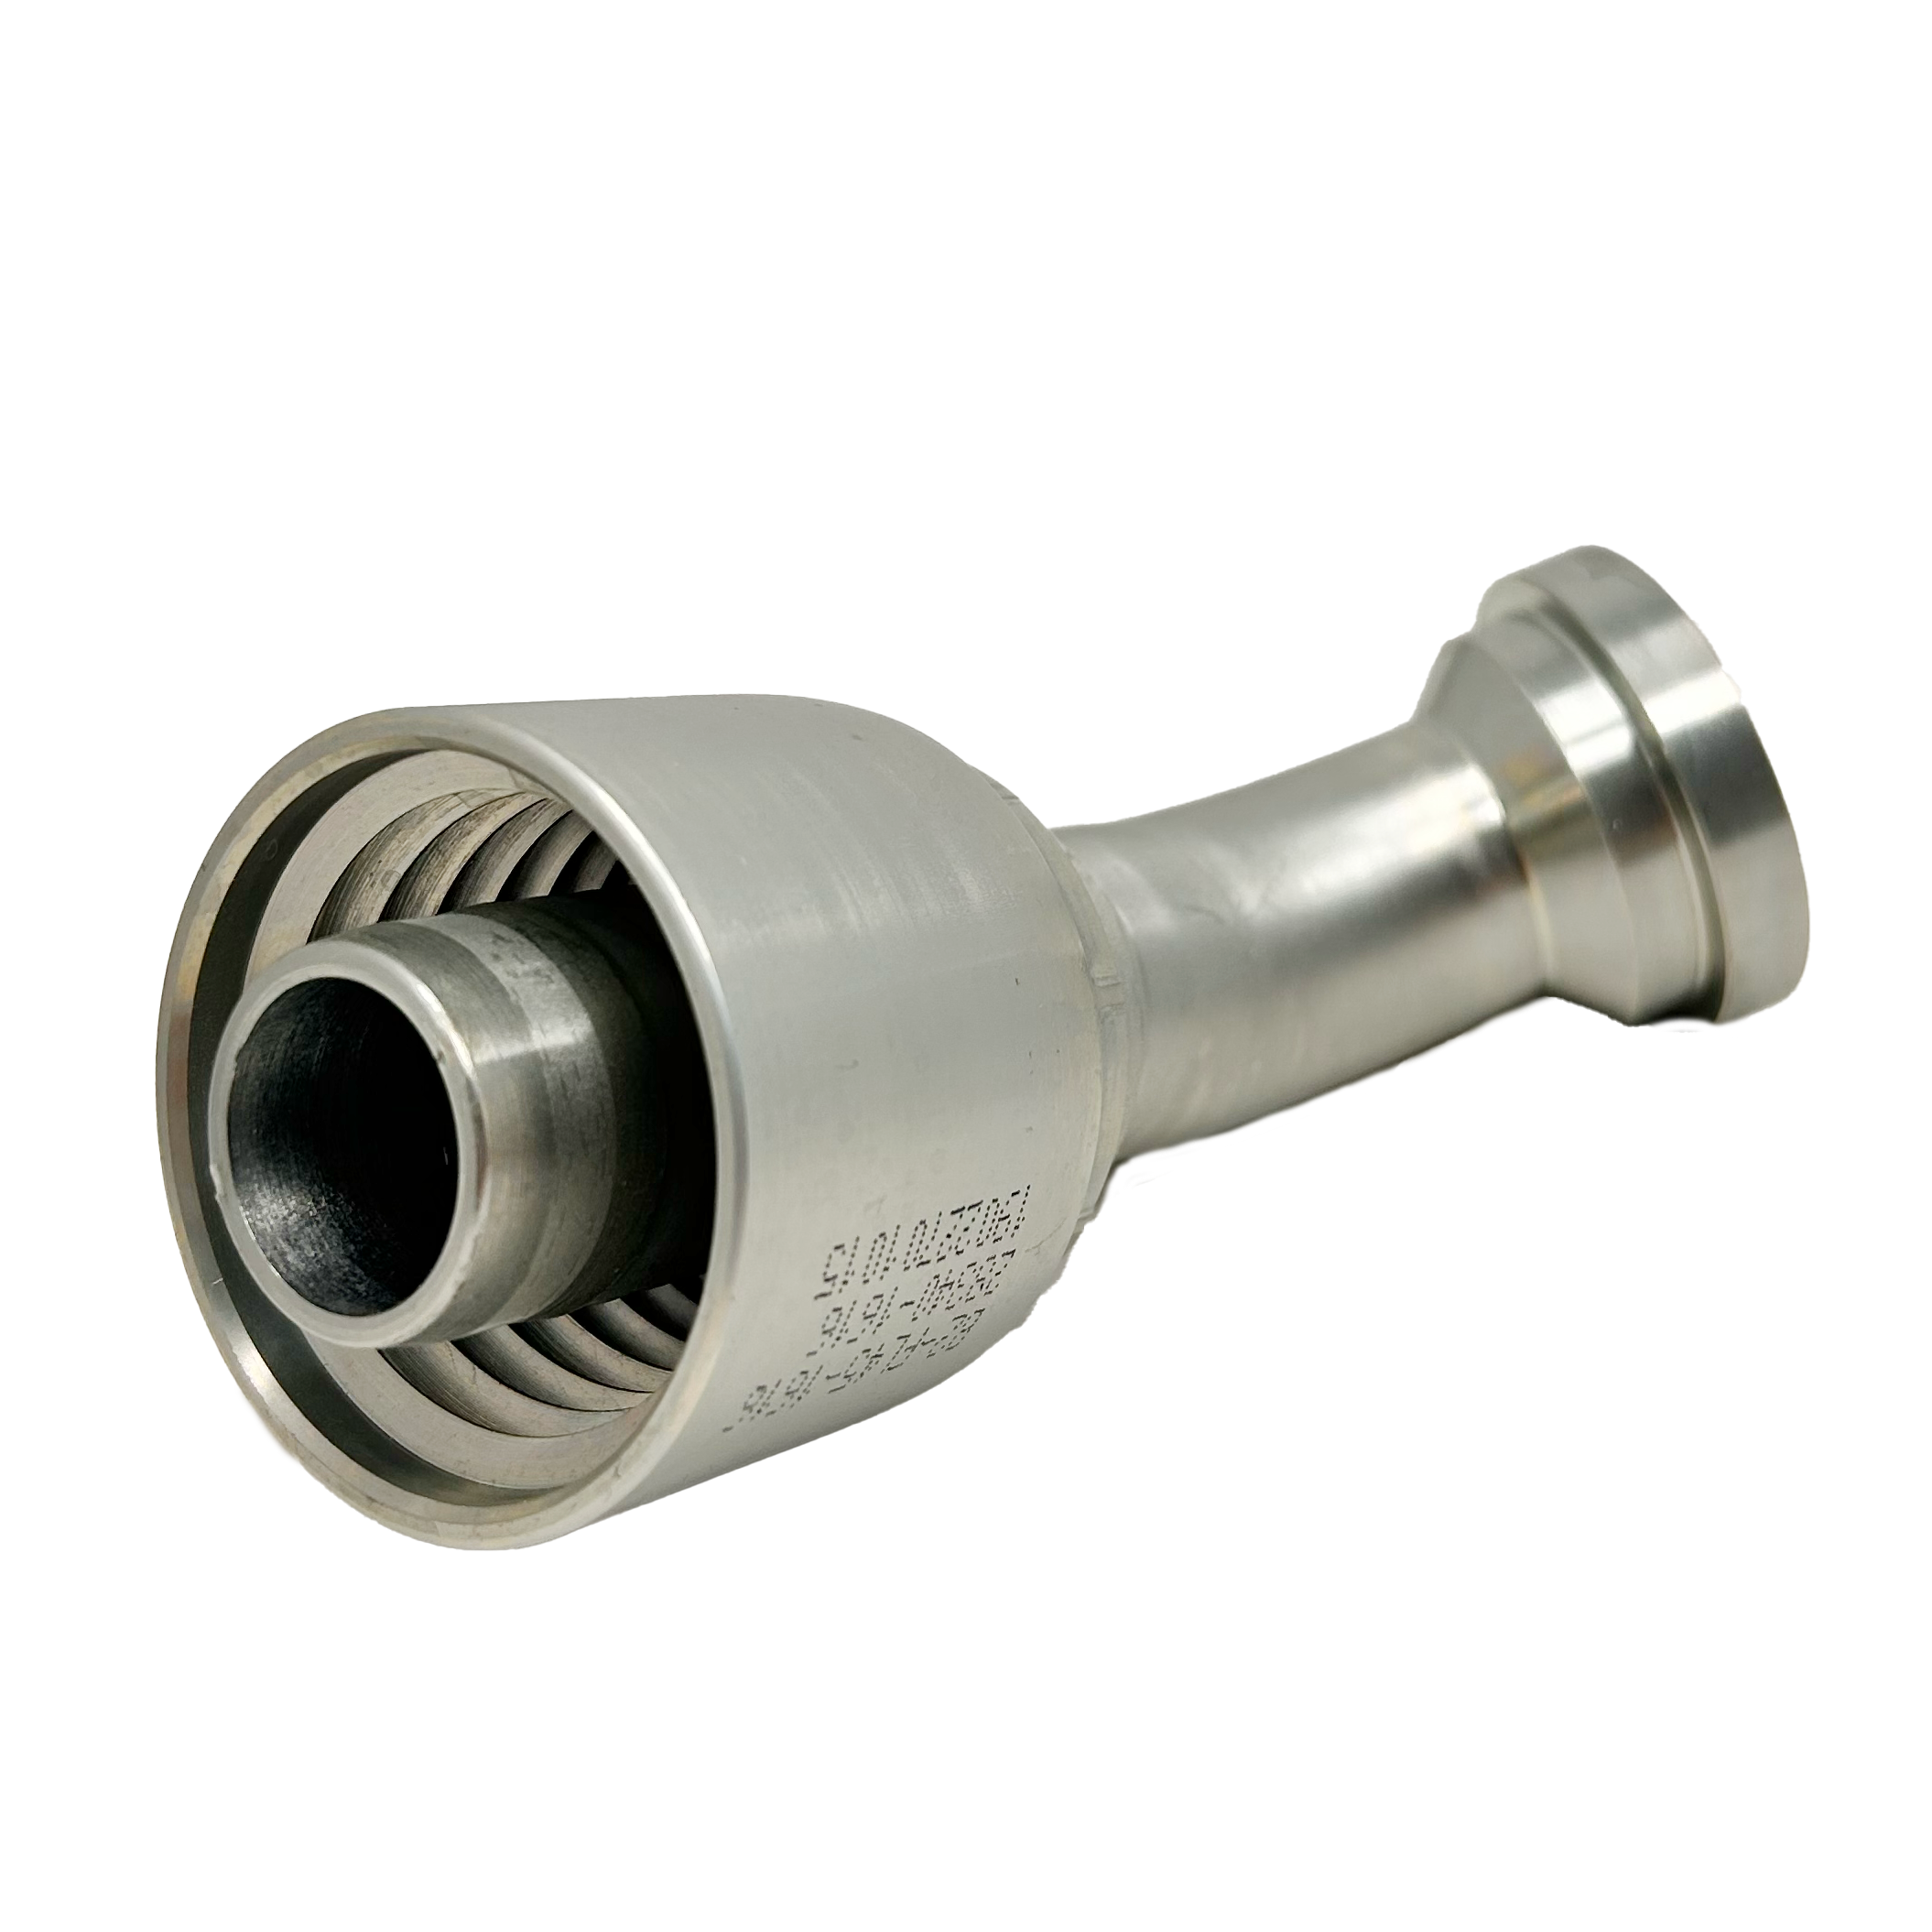 B2-FL45-3232: Continental Hose Fitting, 2" Hose ID x 2" Code 61, 45-Degree Connection